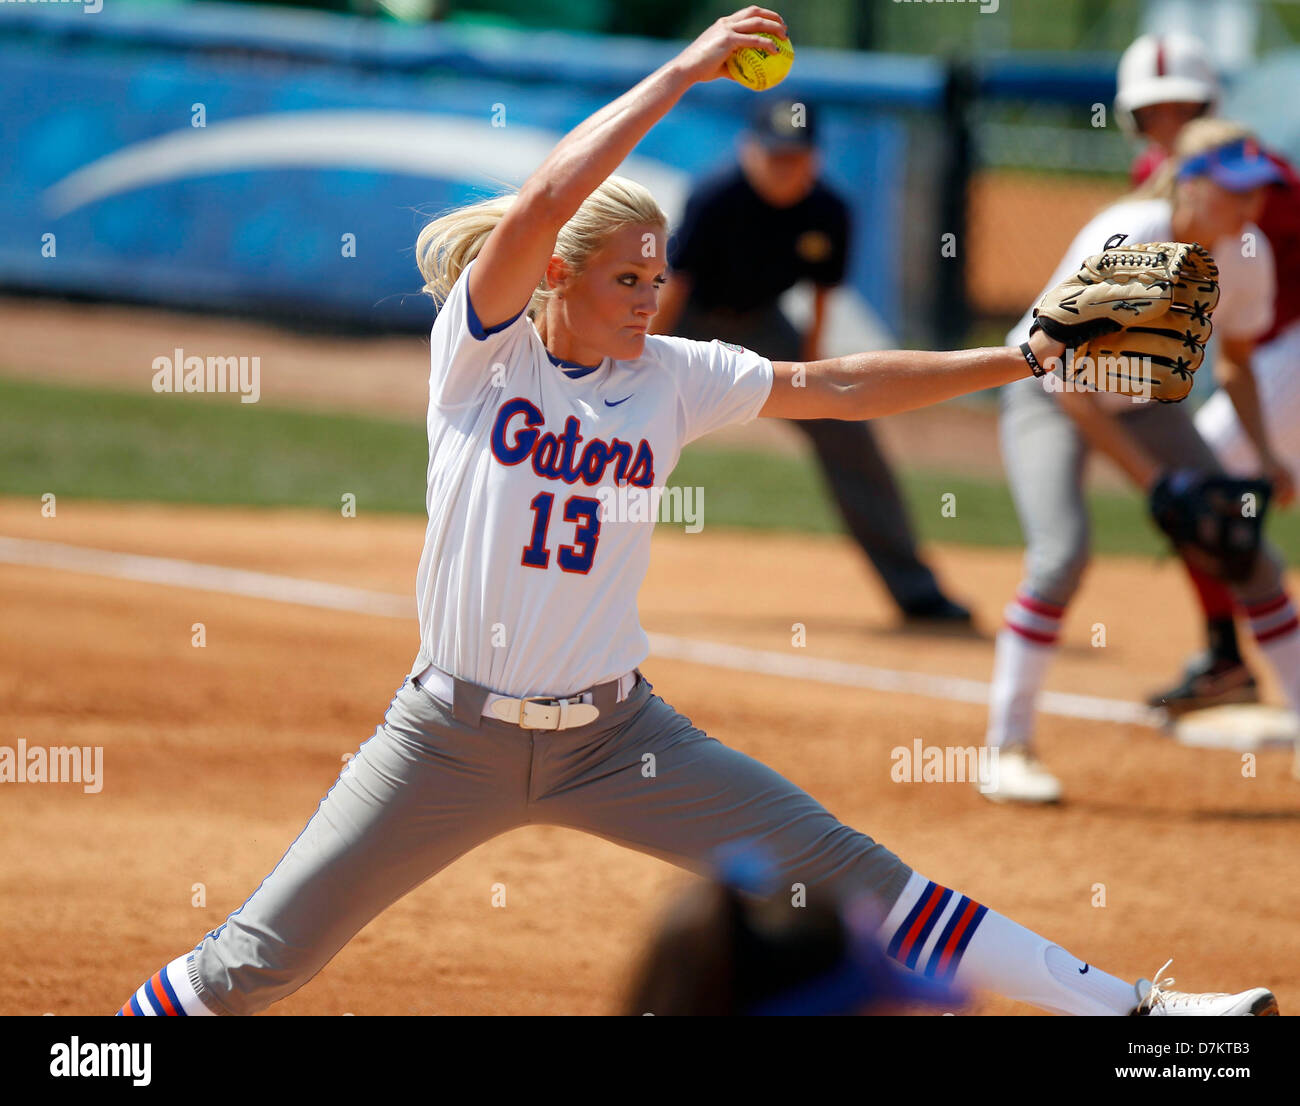 May 9, 2013 - Lexington, KY, USA - Florida pitcher 13- Hannah Rogers pitched in the top of the 2nd inning as The University of Florida played the University of Alabama in the SEC Softball tournament played at John Cropp Stadium on the UK campus in Lexington, Ky. Thursday May 9, 2013. Florida is the No. 1 seed and Alabama is No. 8 seed having advanced by defeating Texas A&M last last night. Florida defeated Alabama 8-4. Photo by Charles Bertram | Staff (Credit Image: © Lexington Herald-Leader/ZUMAPRESS.com) Stock Photo